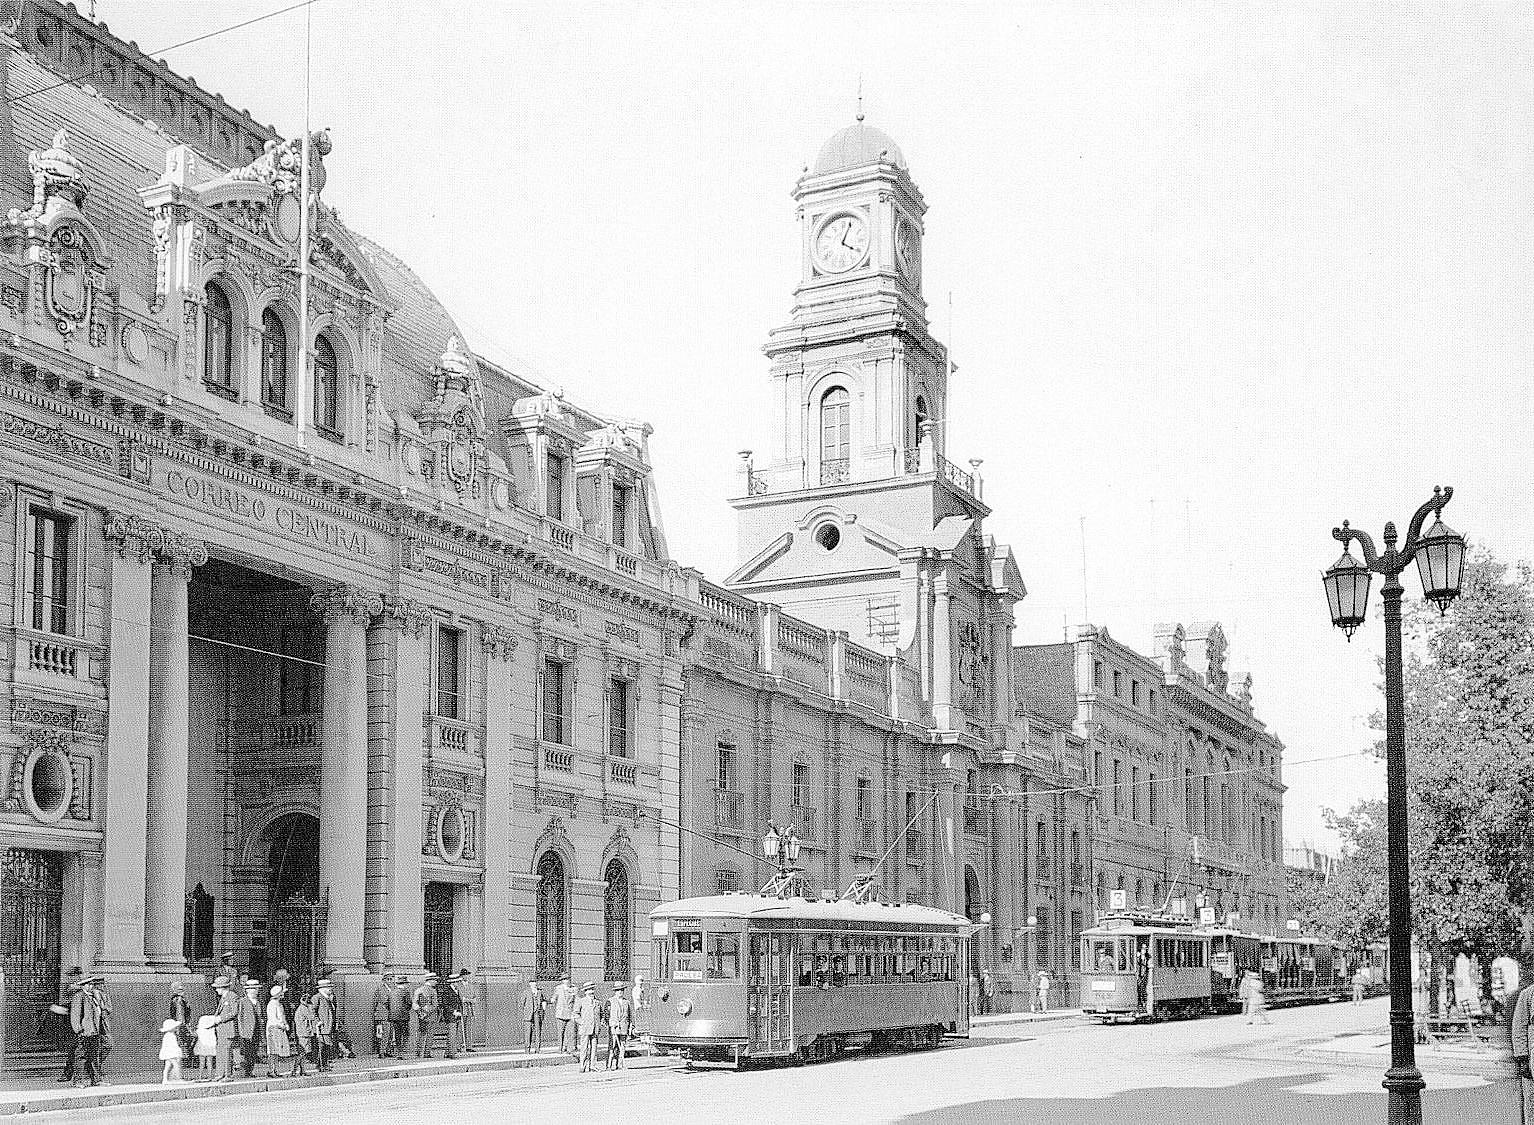 [Calle+Catedral+1927.jpg]